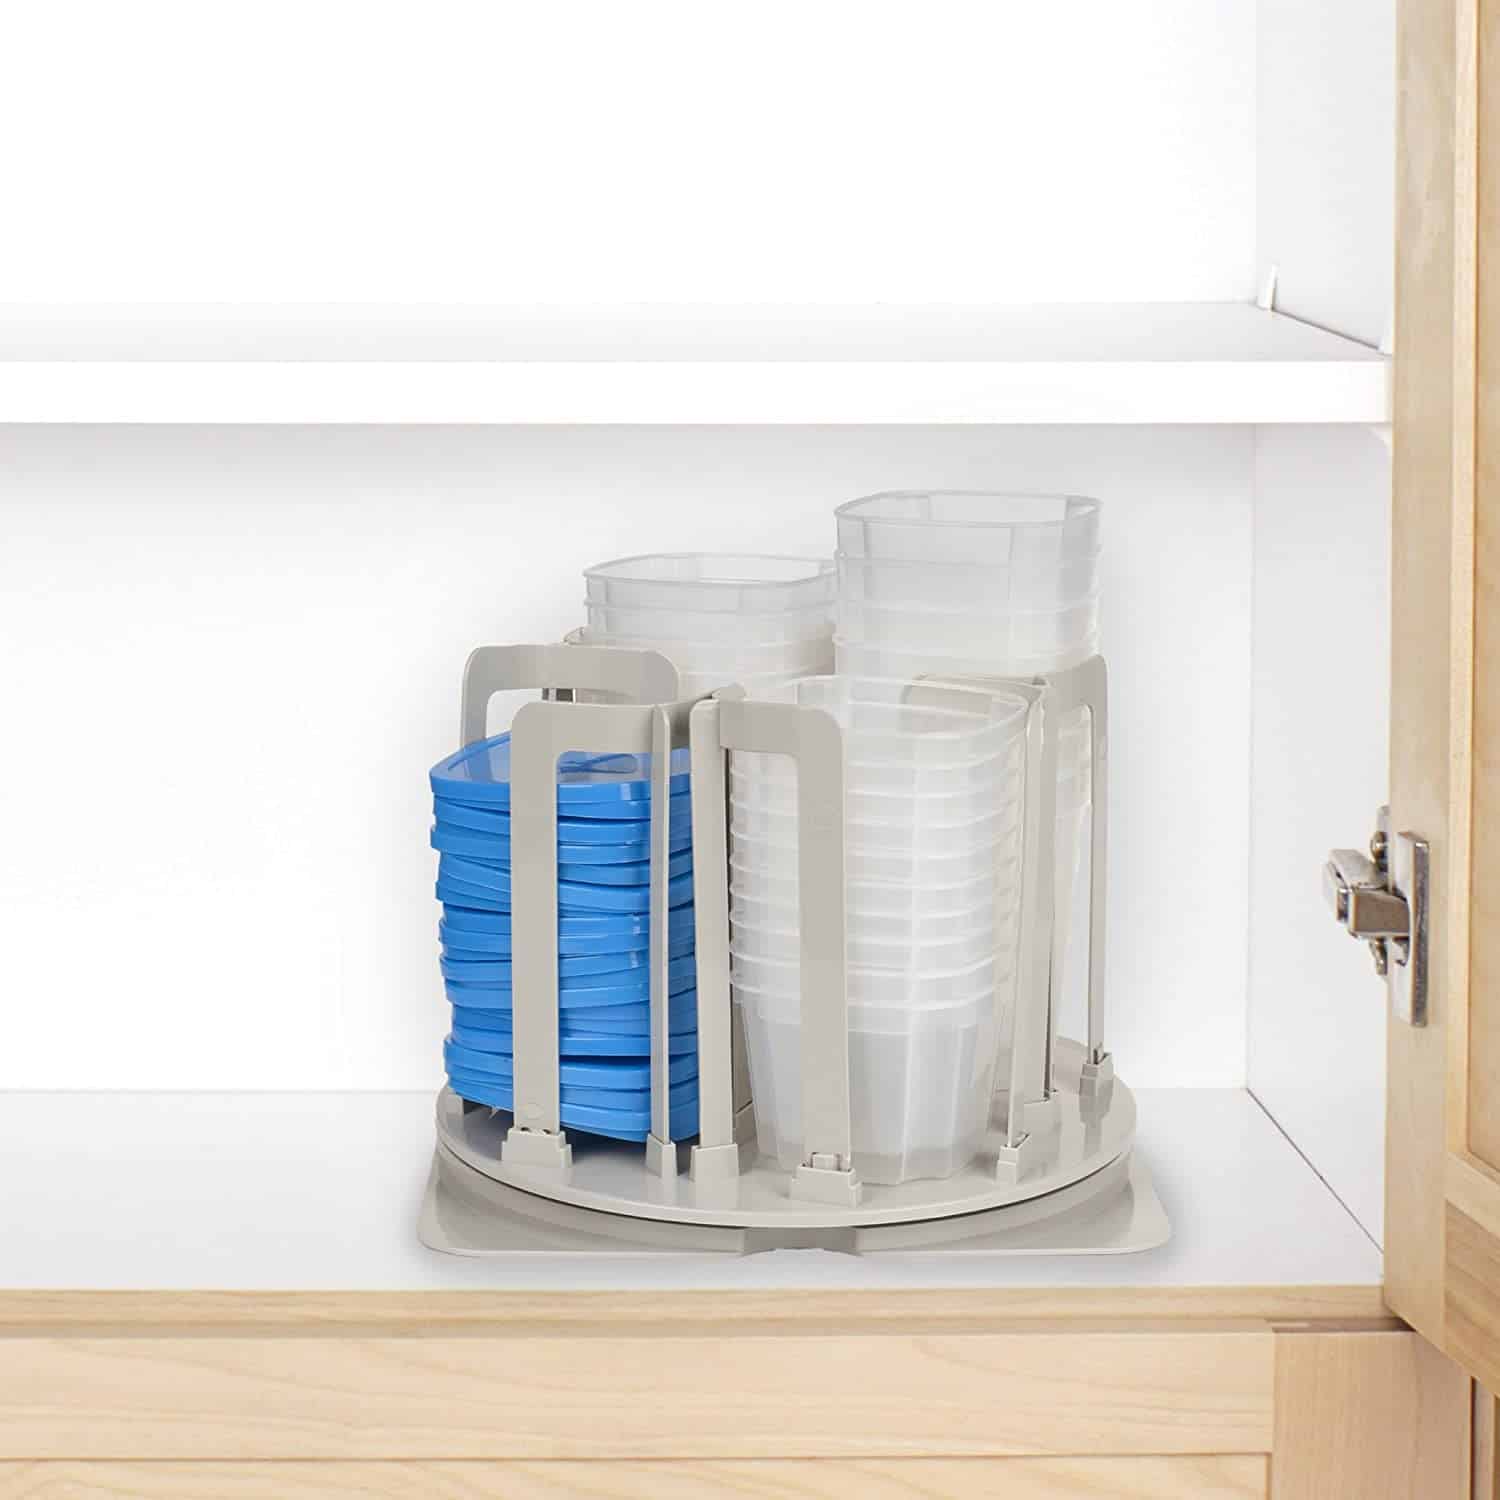 Easy Way to Organize Tupperware in Cabinets